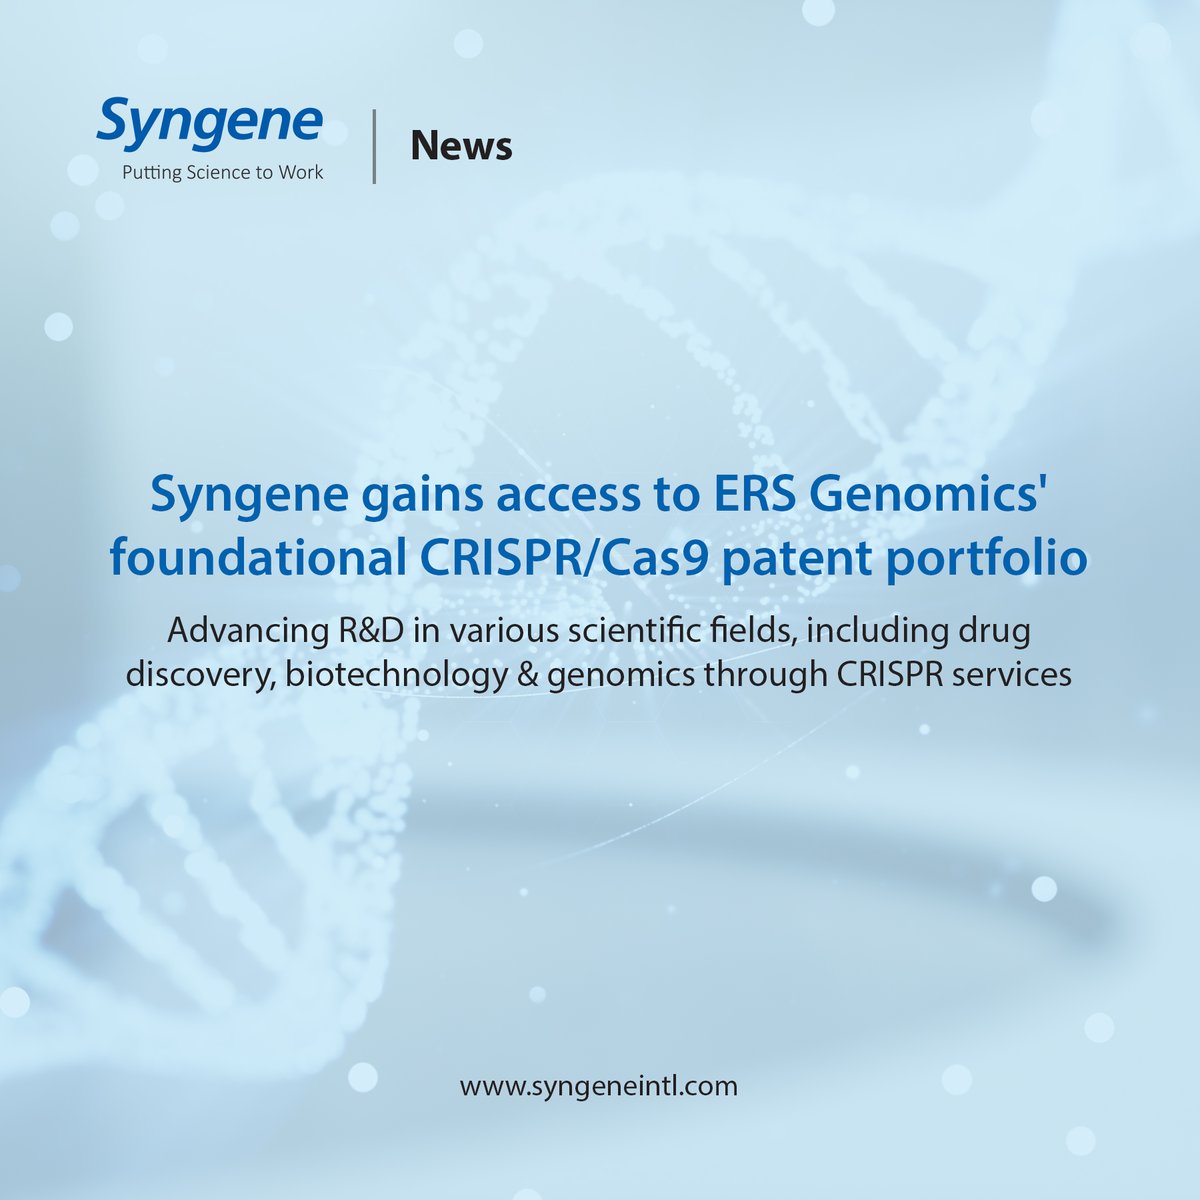 We are delighted to announce that Syngene has gained access to ERS Genomics' foundational #CRISPR patent portfolio through a licensing agreement, ushering in a new era of gene editing capabilities for our global partners.

#SickleCellDisease #BetaThalassemia
1/2